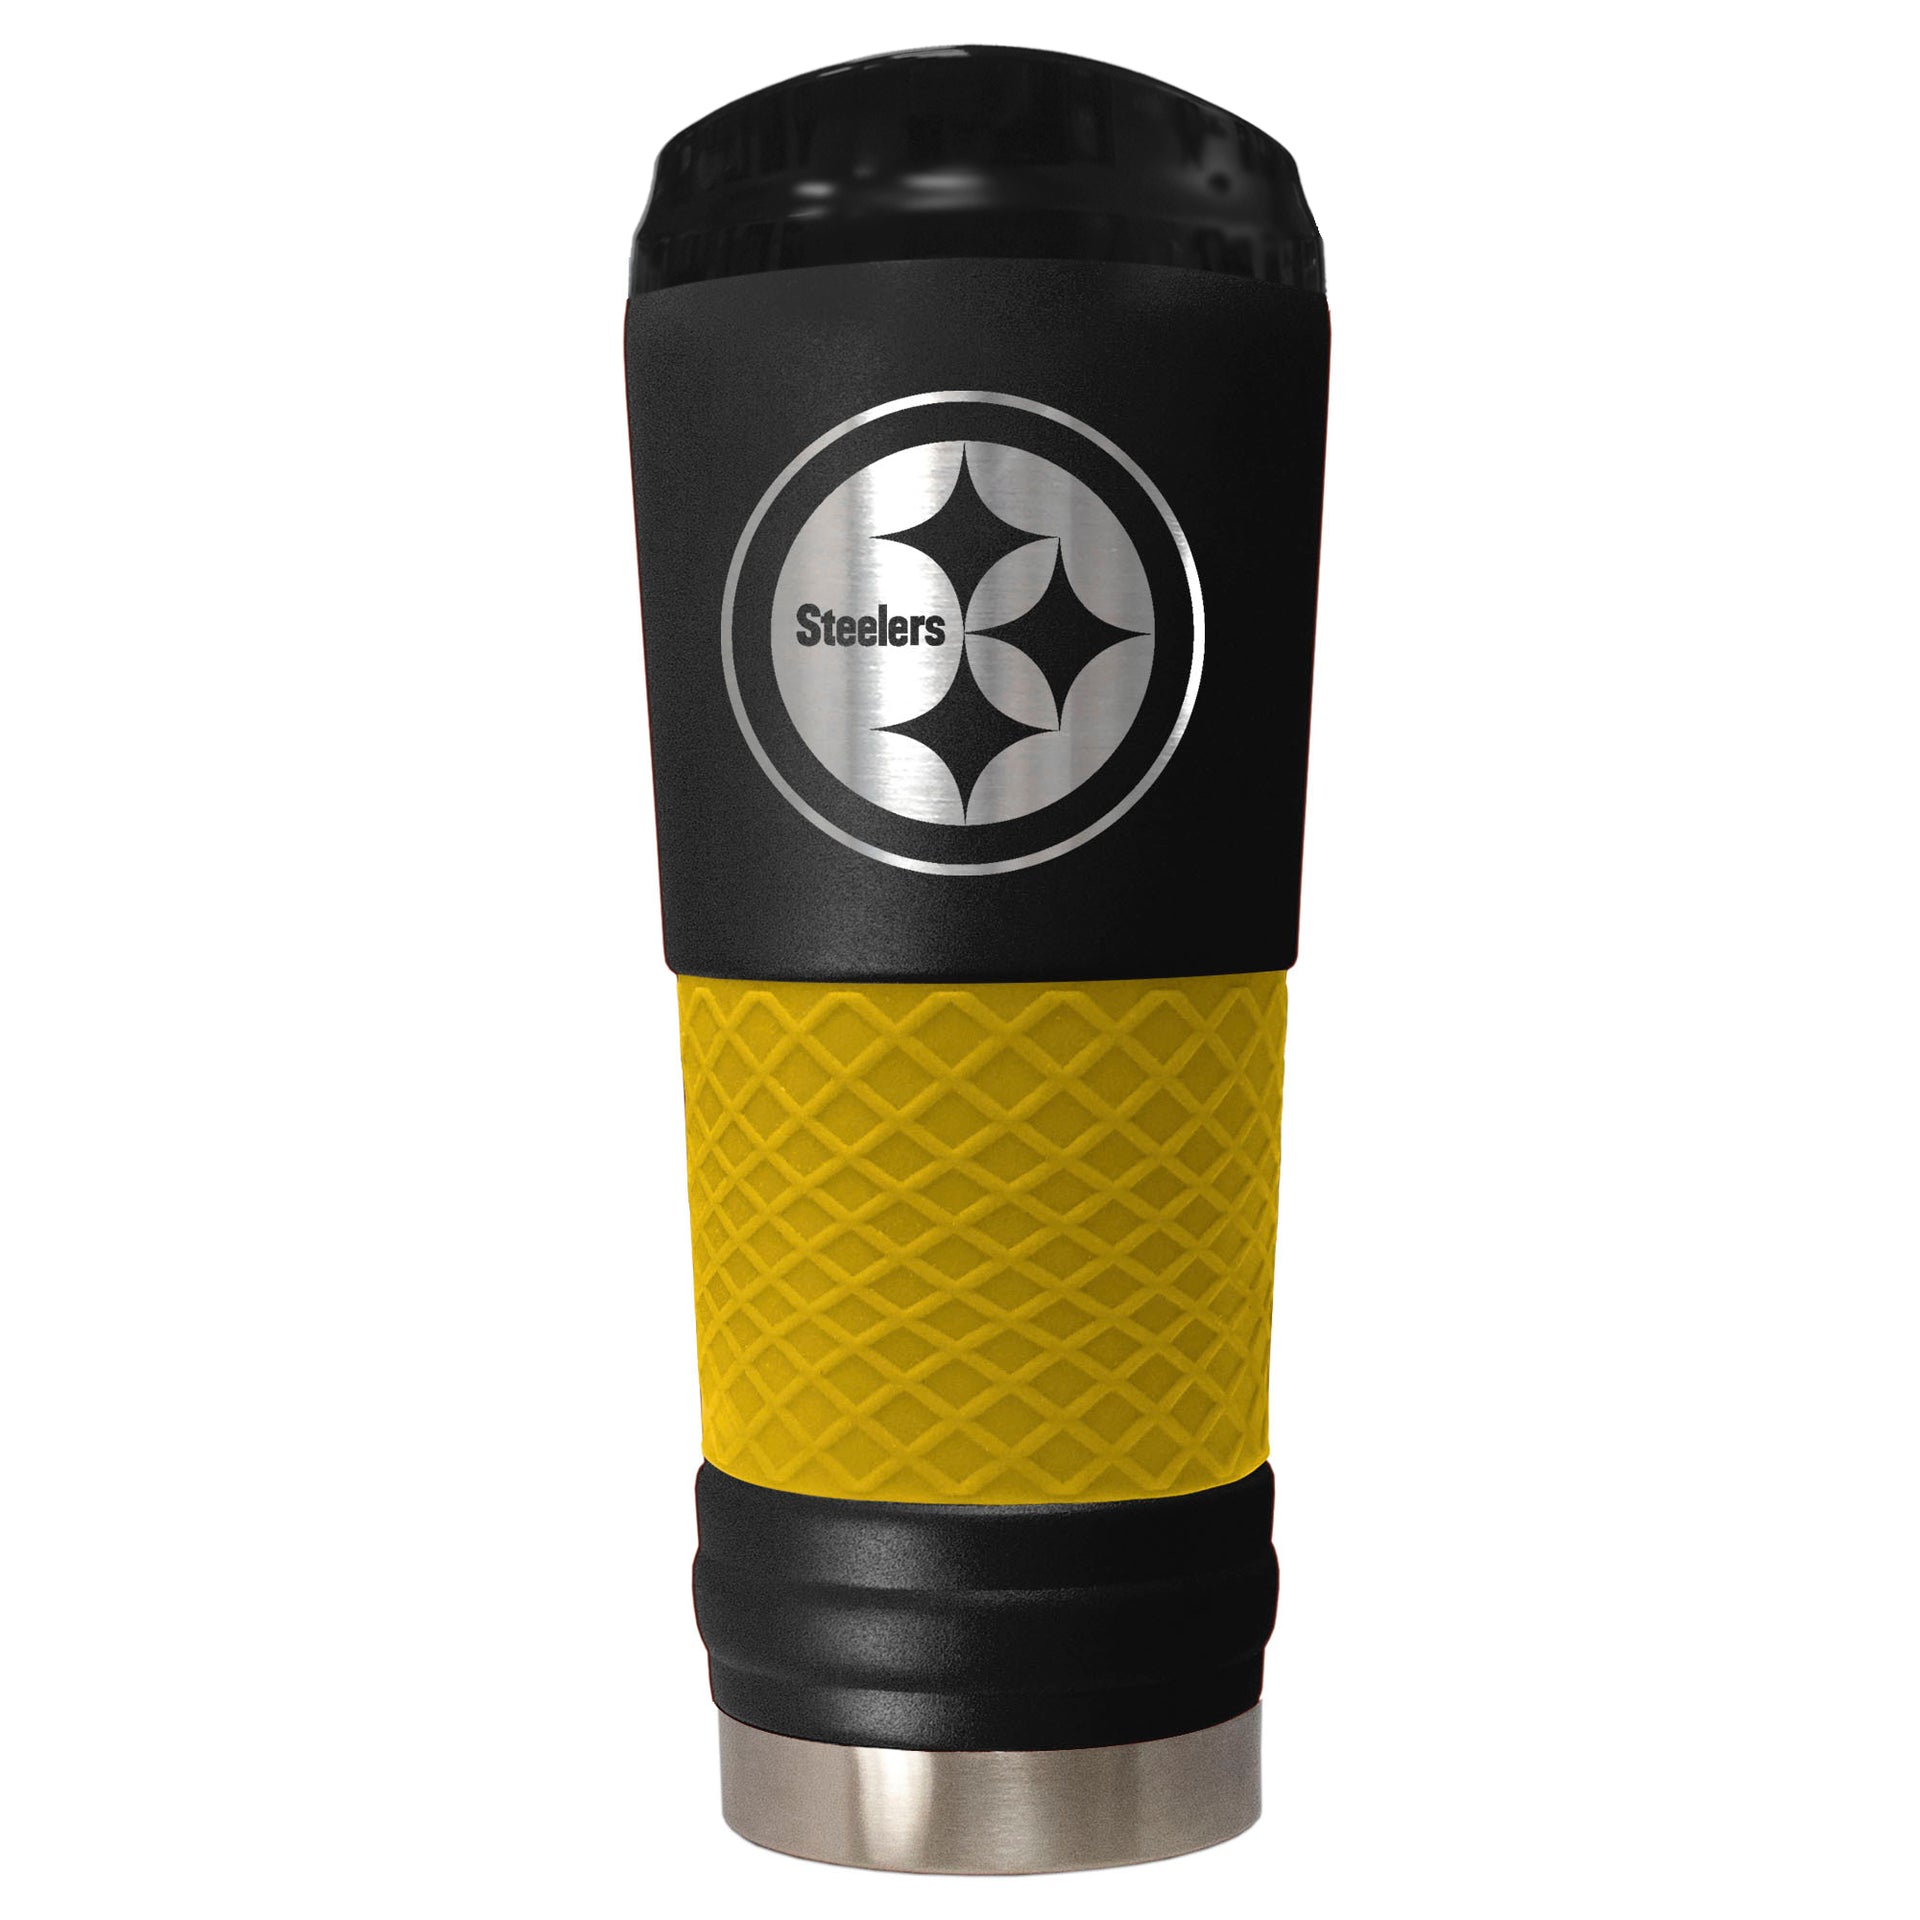 Pittsburgh Steelers "The Draft" 24 oz. Stainless Steel Travel Tumbler - Dynasty Sports & Framing 